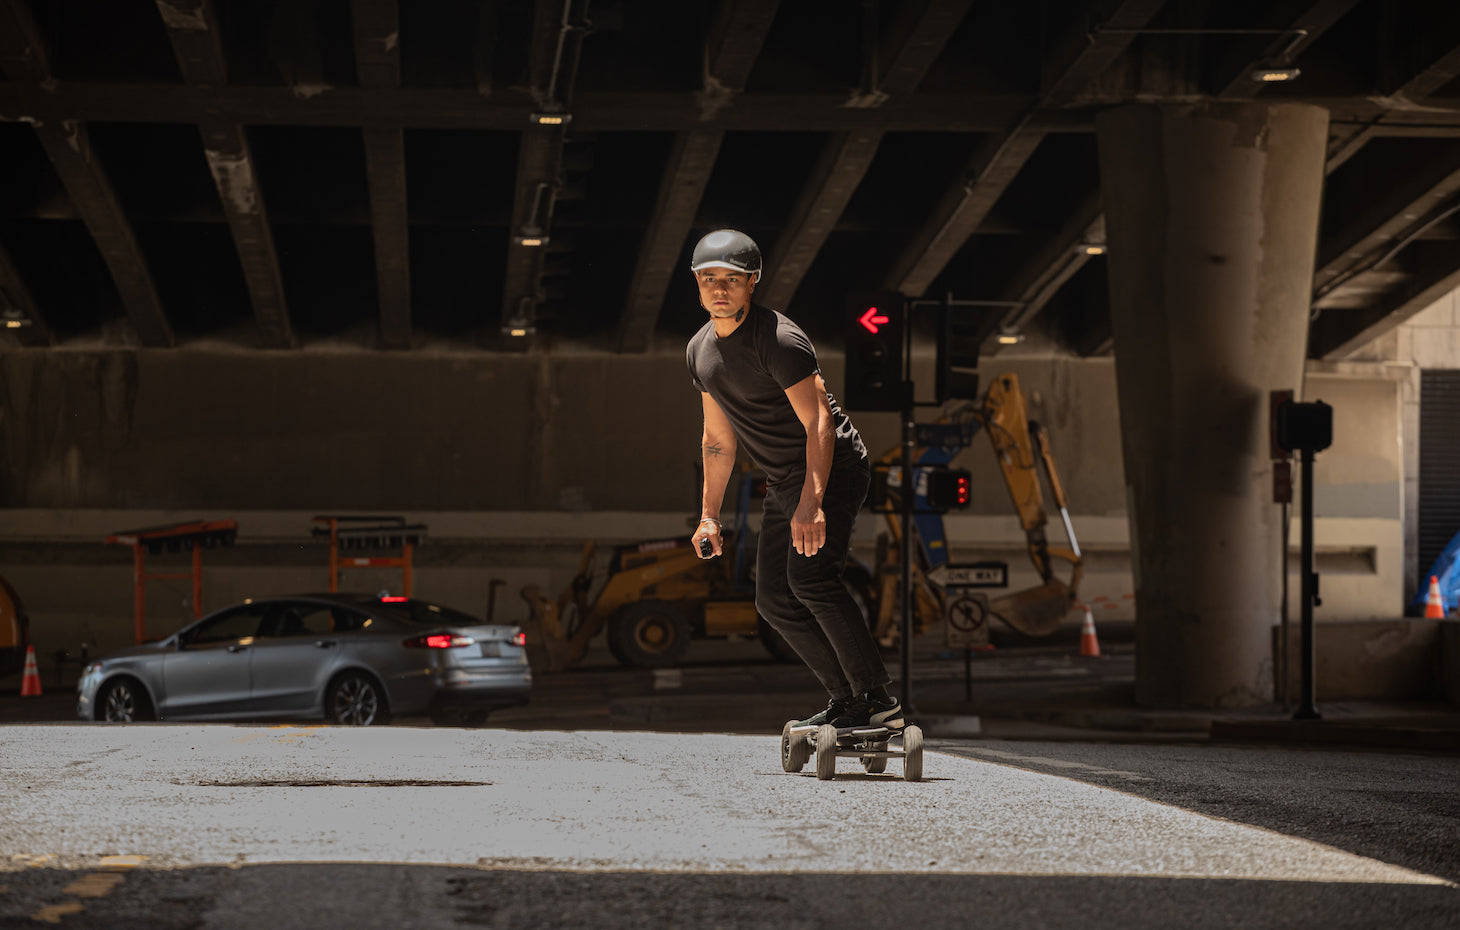 FINDING THE BEST ELECTRIC SKATEBOARD HELMET FOR YOUR NEEDS